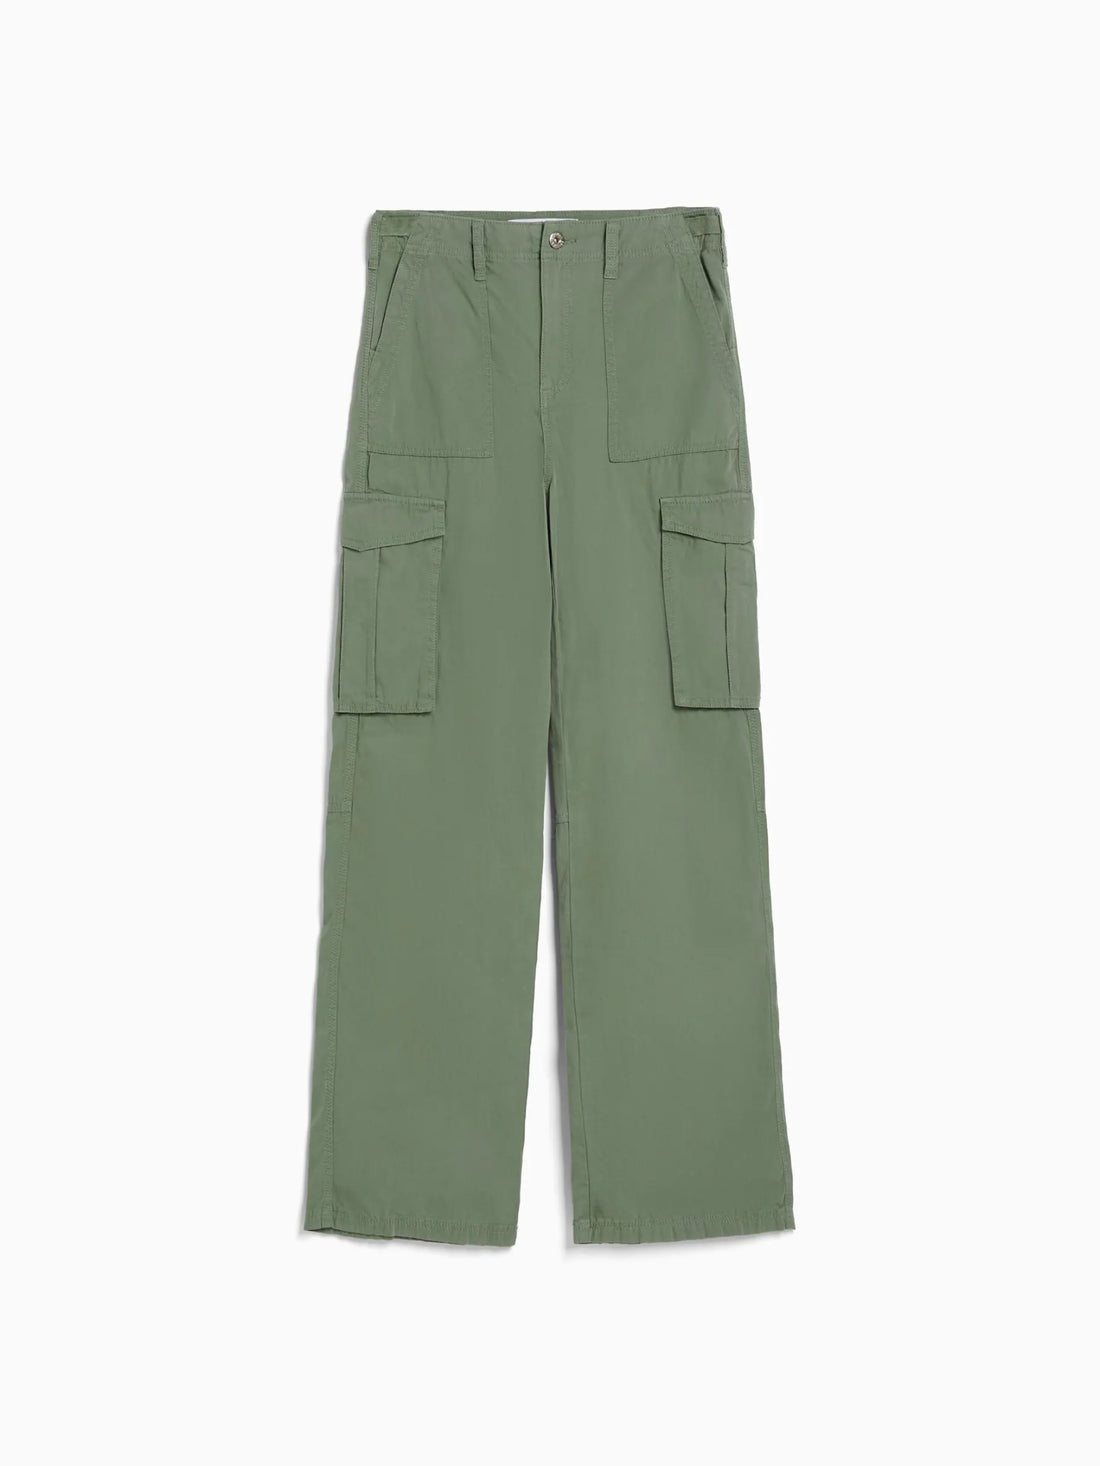 Adjustable straight fit cargo pants